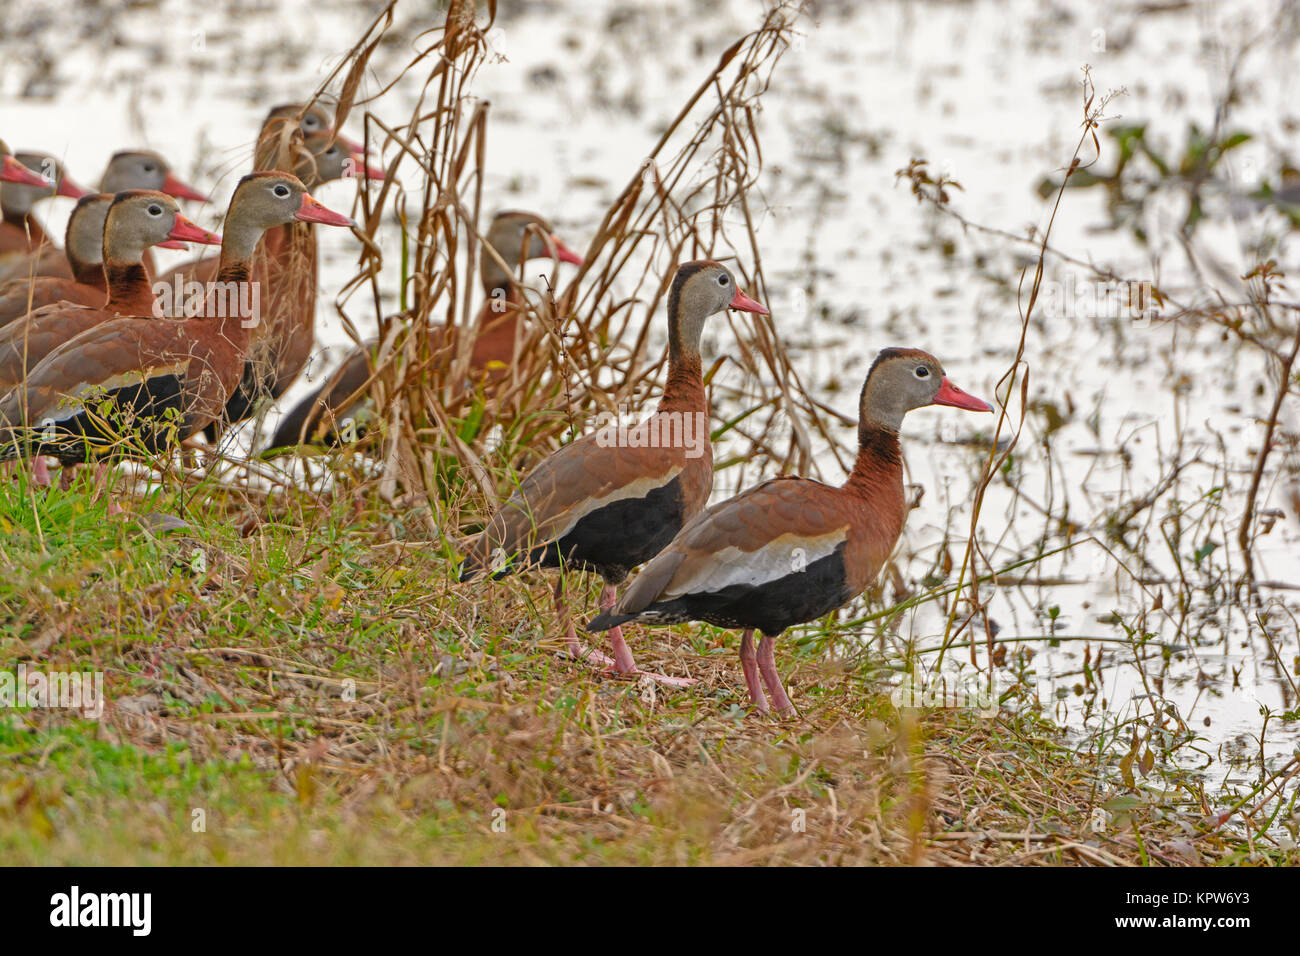 Black-bellied Whistling Ducks on a Wetland Shore Stock Photo